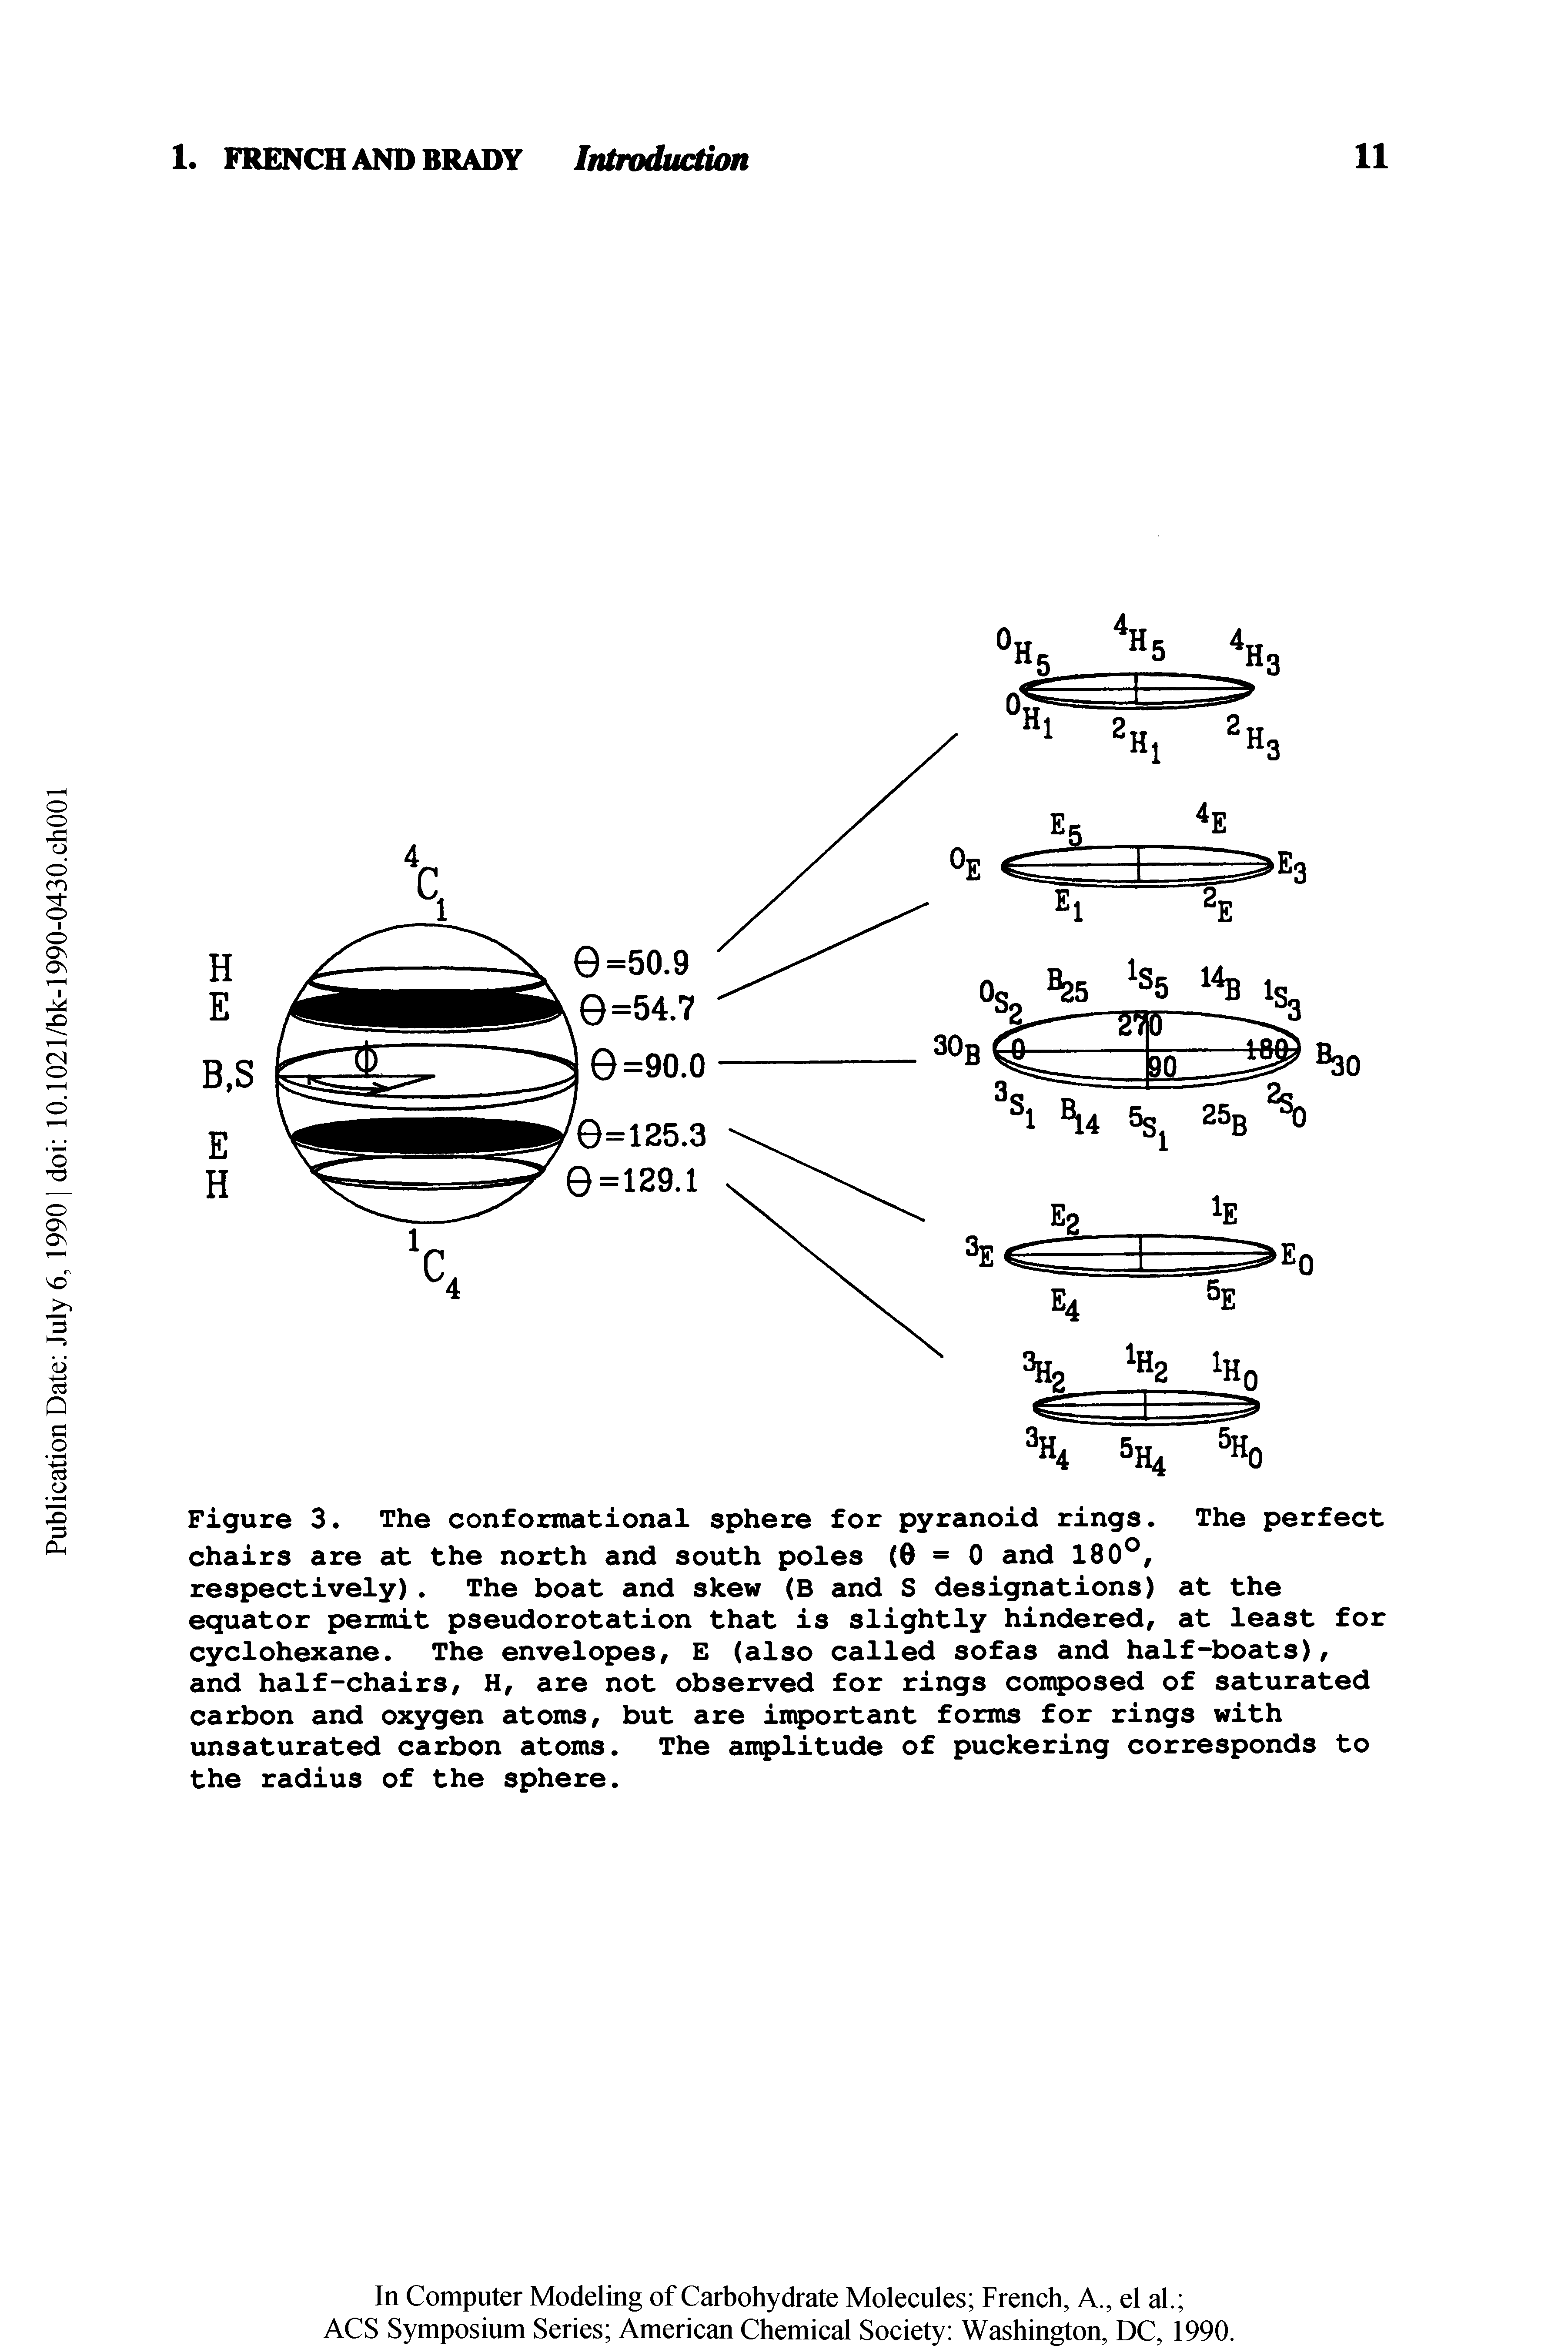 Figure 3. The conformational sphere for pyranoid rings. The perfect chairs are at the north and south poles (0=0 and 180 , respectively). The boat and skew (B and S designations) at the equator permit pseudorotation that is slightly hindered, at least for cyclohexane. The envelopes, E (also called sofas and half-boats), and half-chairs, H, are not observed for rings coiqposed of saturated carbon and oxygen atoms, but are iiqportant forms for rings with unsaturated carbon atoms. The aiqplitude of puckering corresponds to the radius of the sphere.